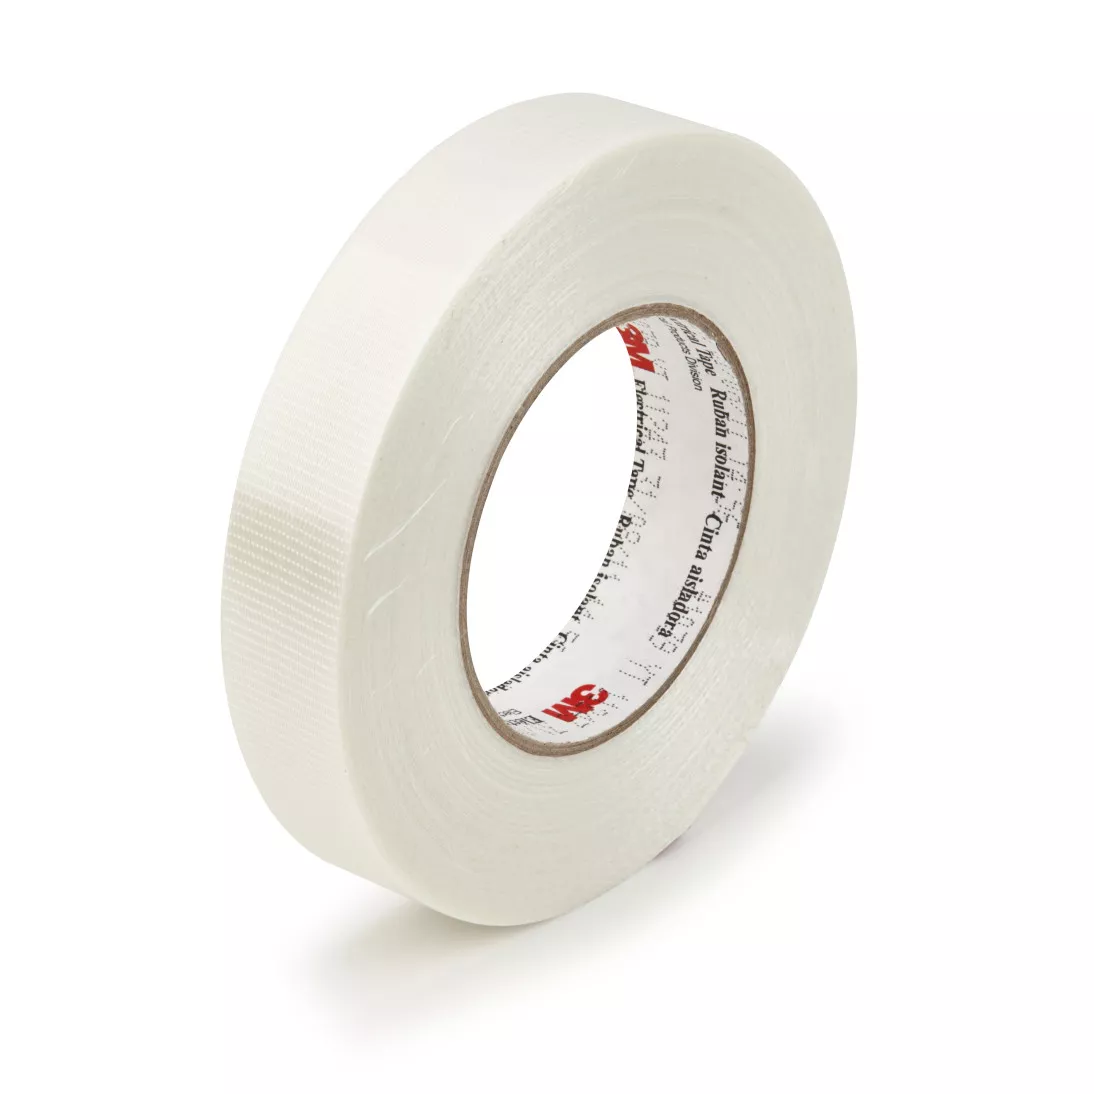 3M™ Filament-Reinforced Electrical Tape 1039, 6 in X 60 yds, paper core,
Log roll, 8 Rolls/Case